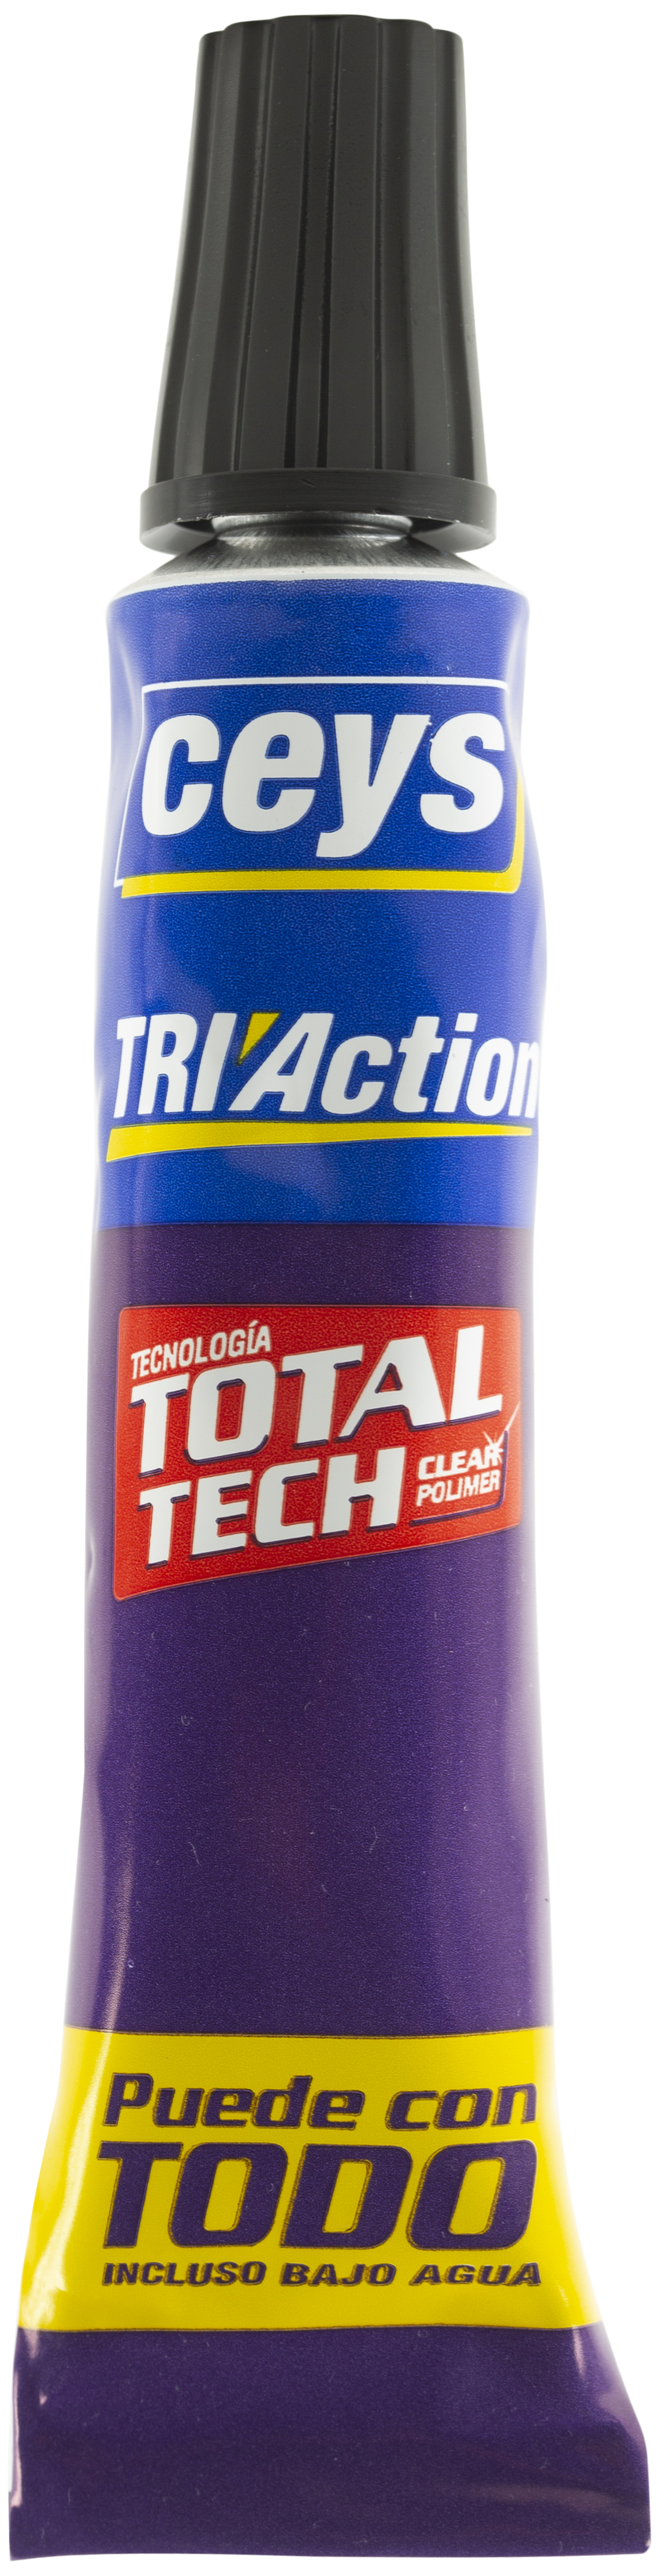 Tri\'Action Total Tech Invisible 75g CEYS